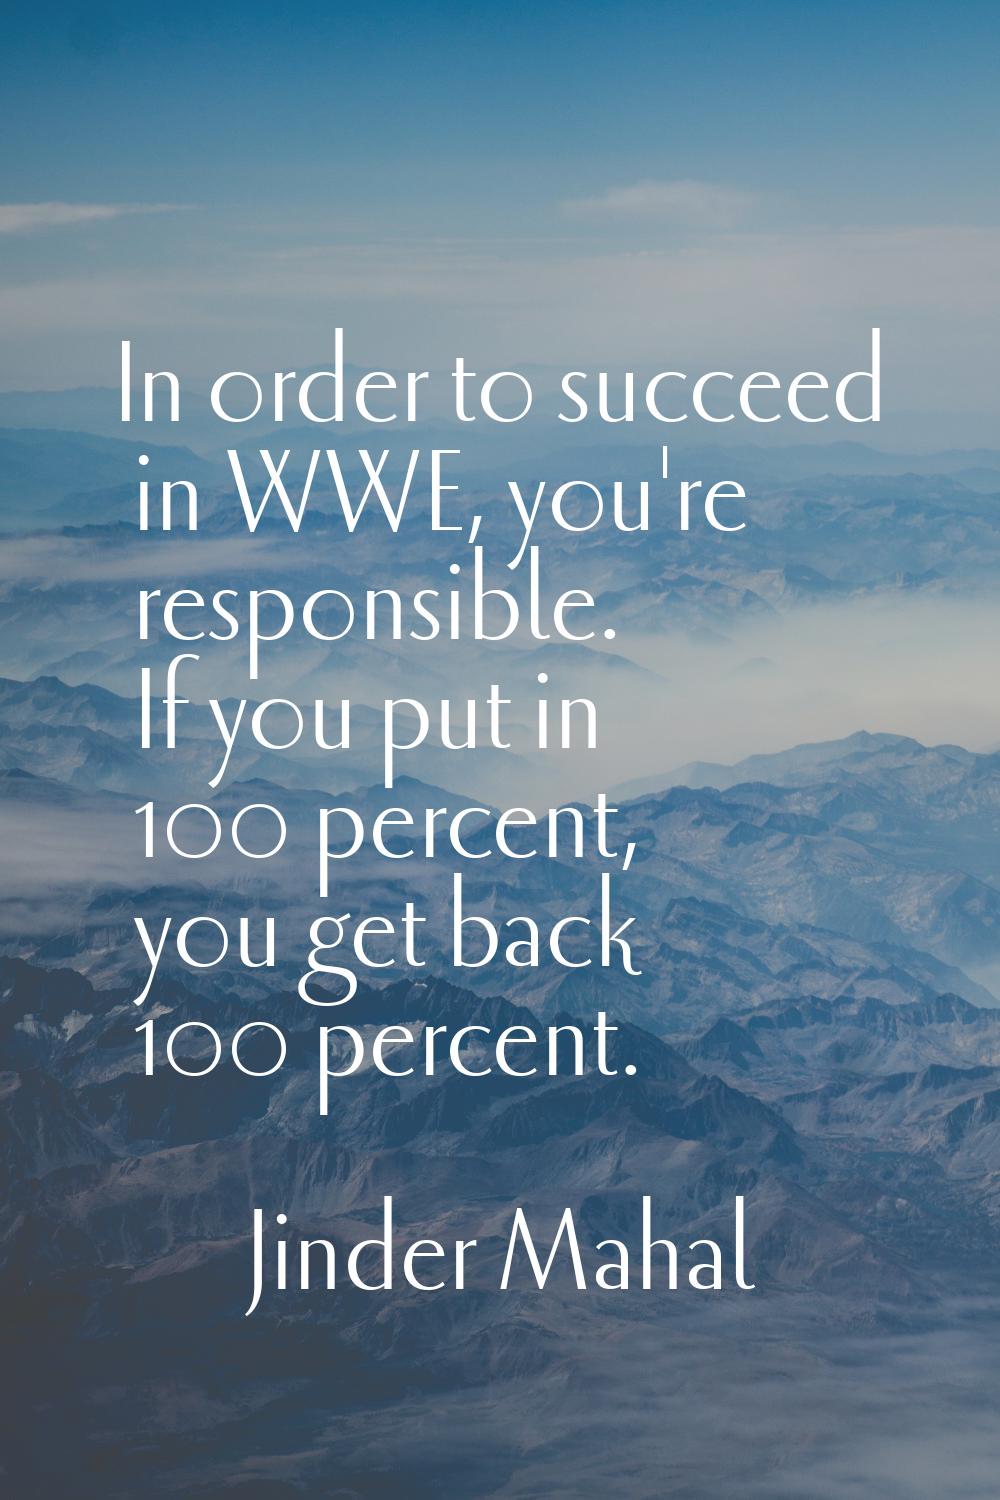 In order to succeed in WWE, you're responsible. If you put in 100 percent, you get back 100 percent